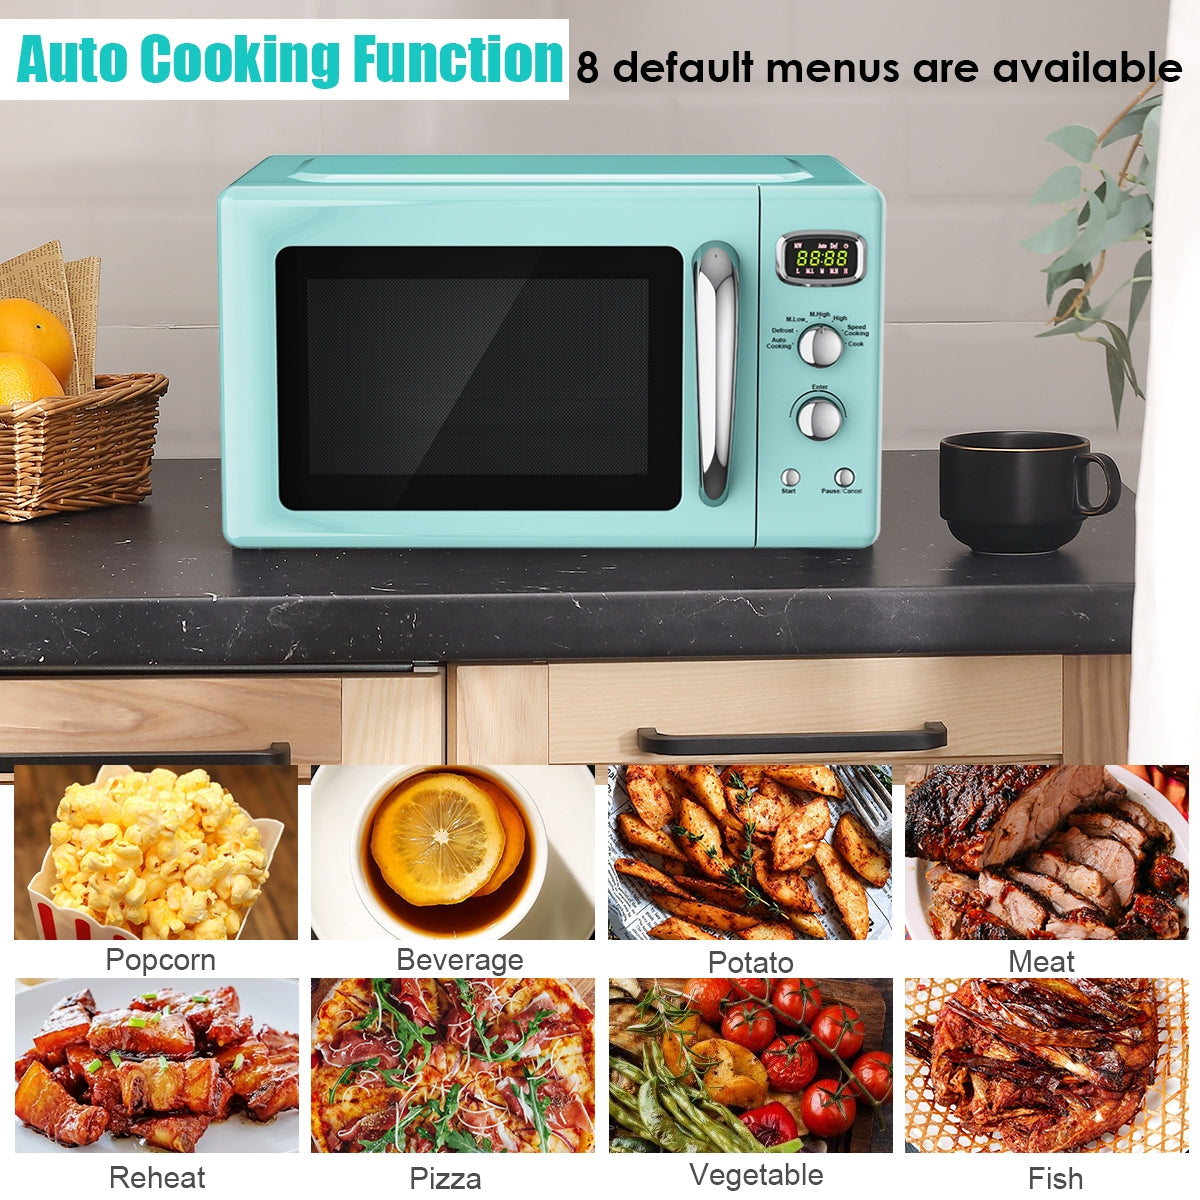 Customize your cooking with auto cooking mode: The retro microwave oven comes with a default cooking menu for popular foods like popcorn, pizza, and potatoes. Simply select the menu, enter the weight, and press the "start" button to begin cooking. The convenient auto-cooking program menu brings efficiency and ease to your daily life.